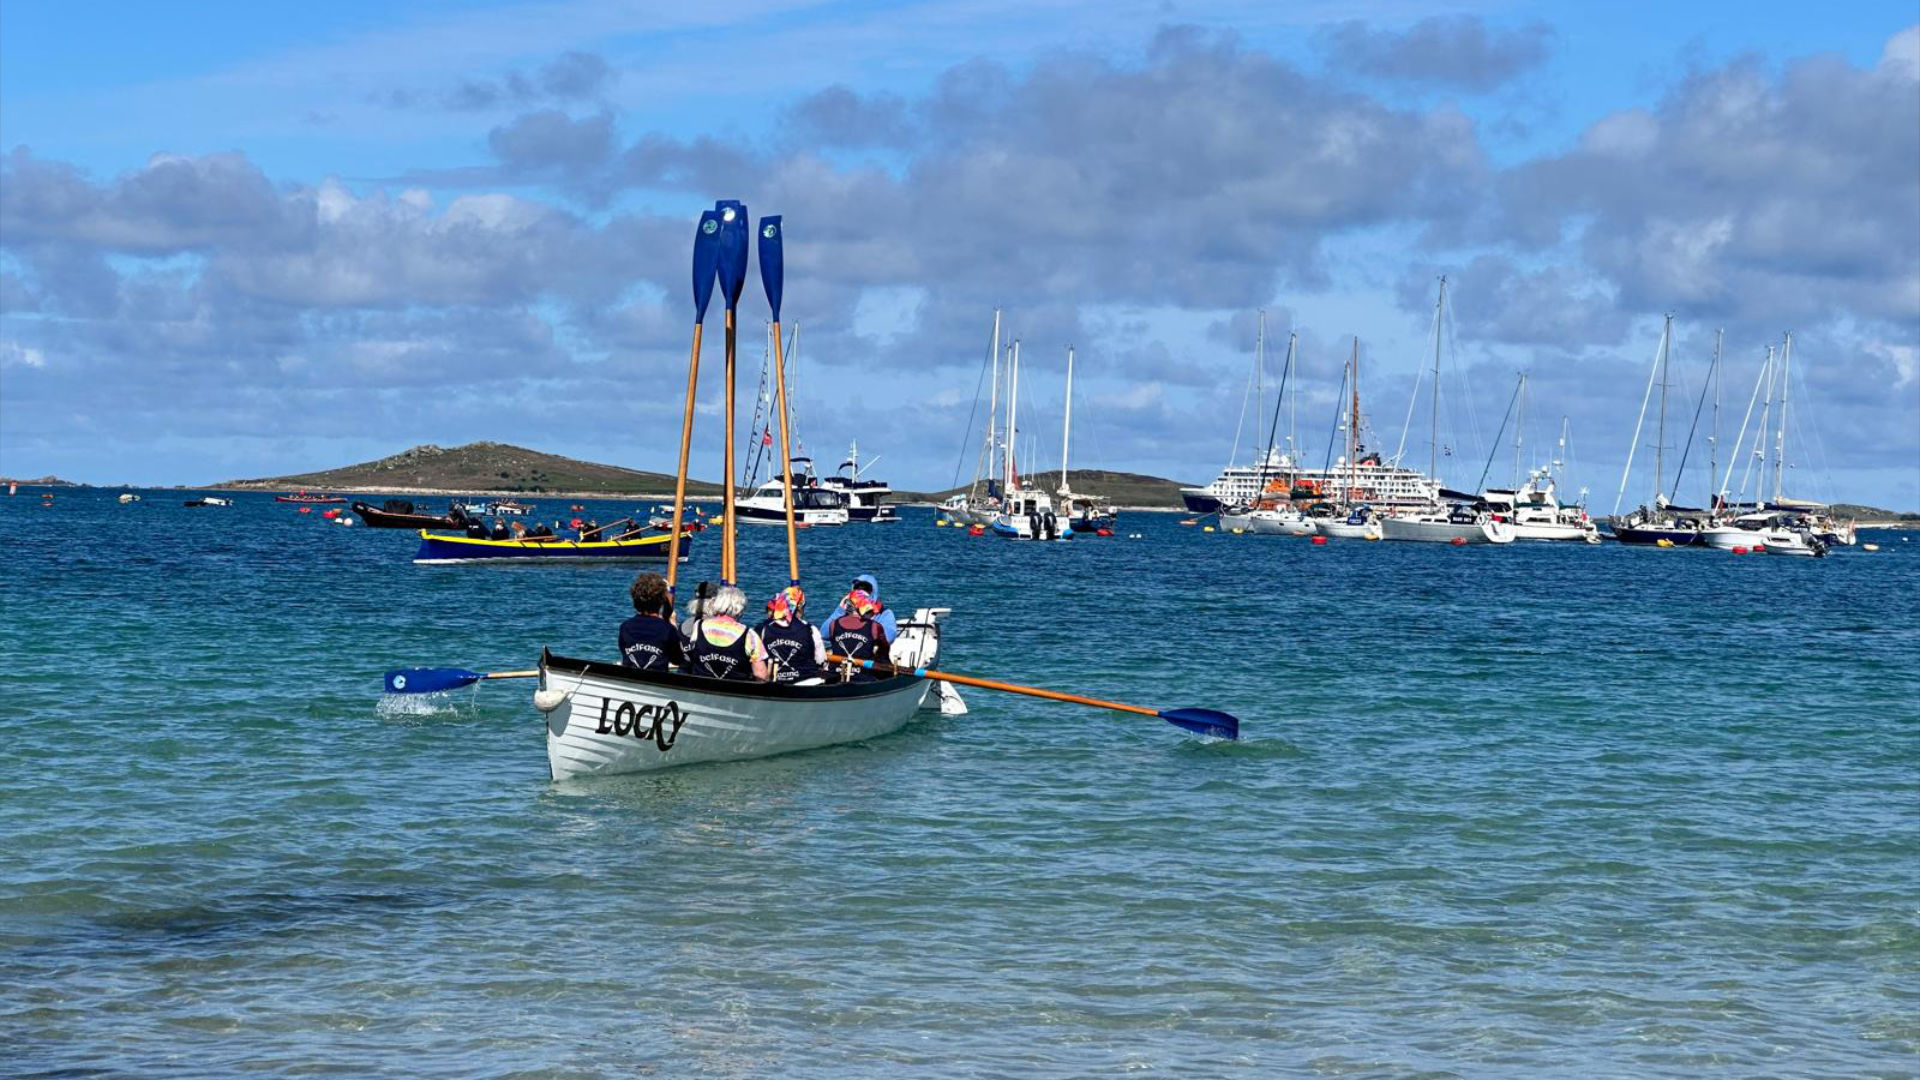 US Rowers Sculling in Scilly